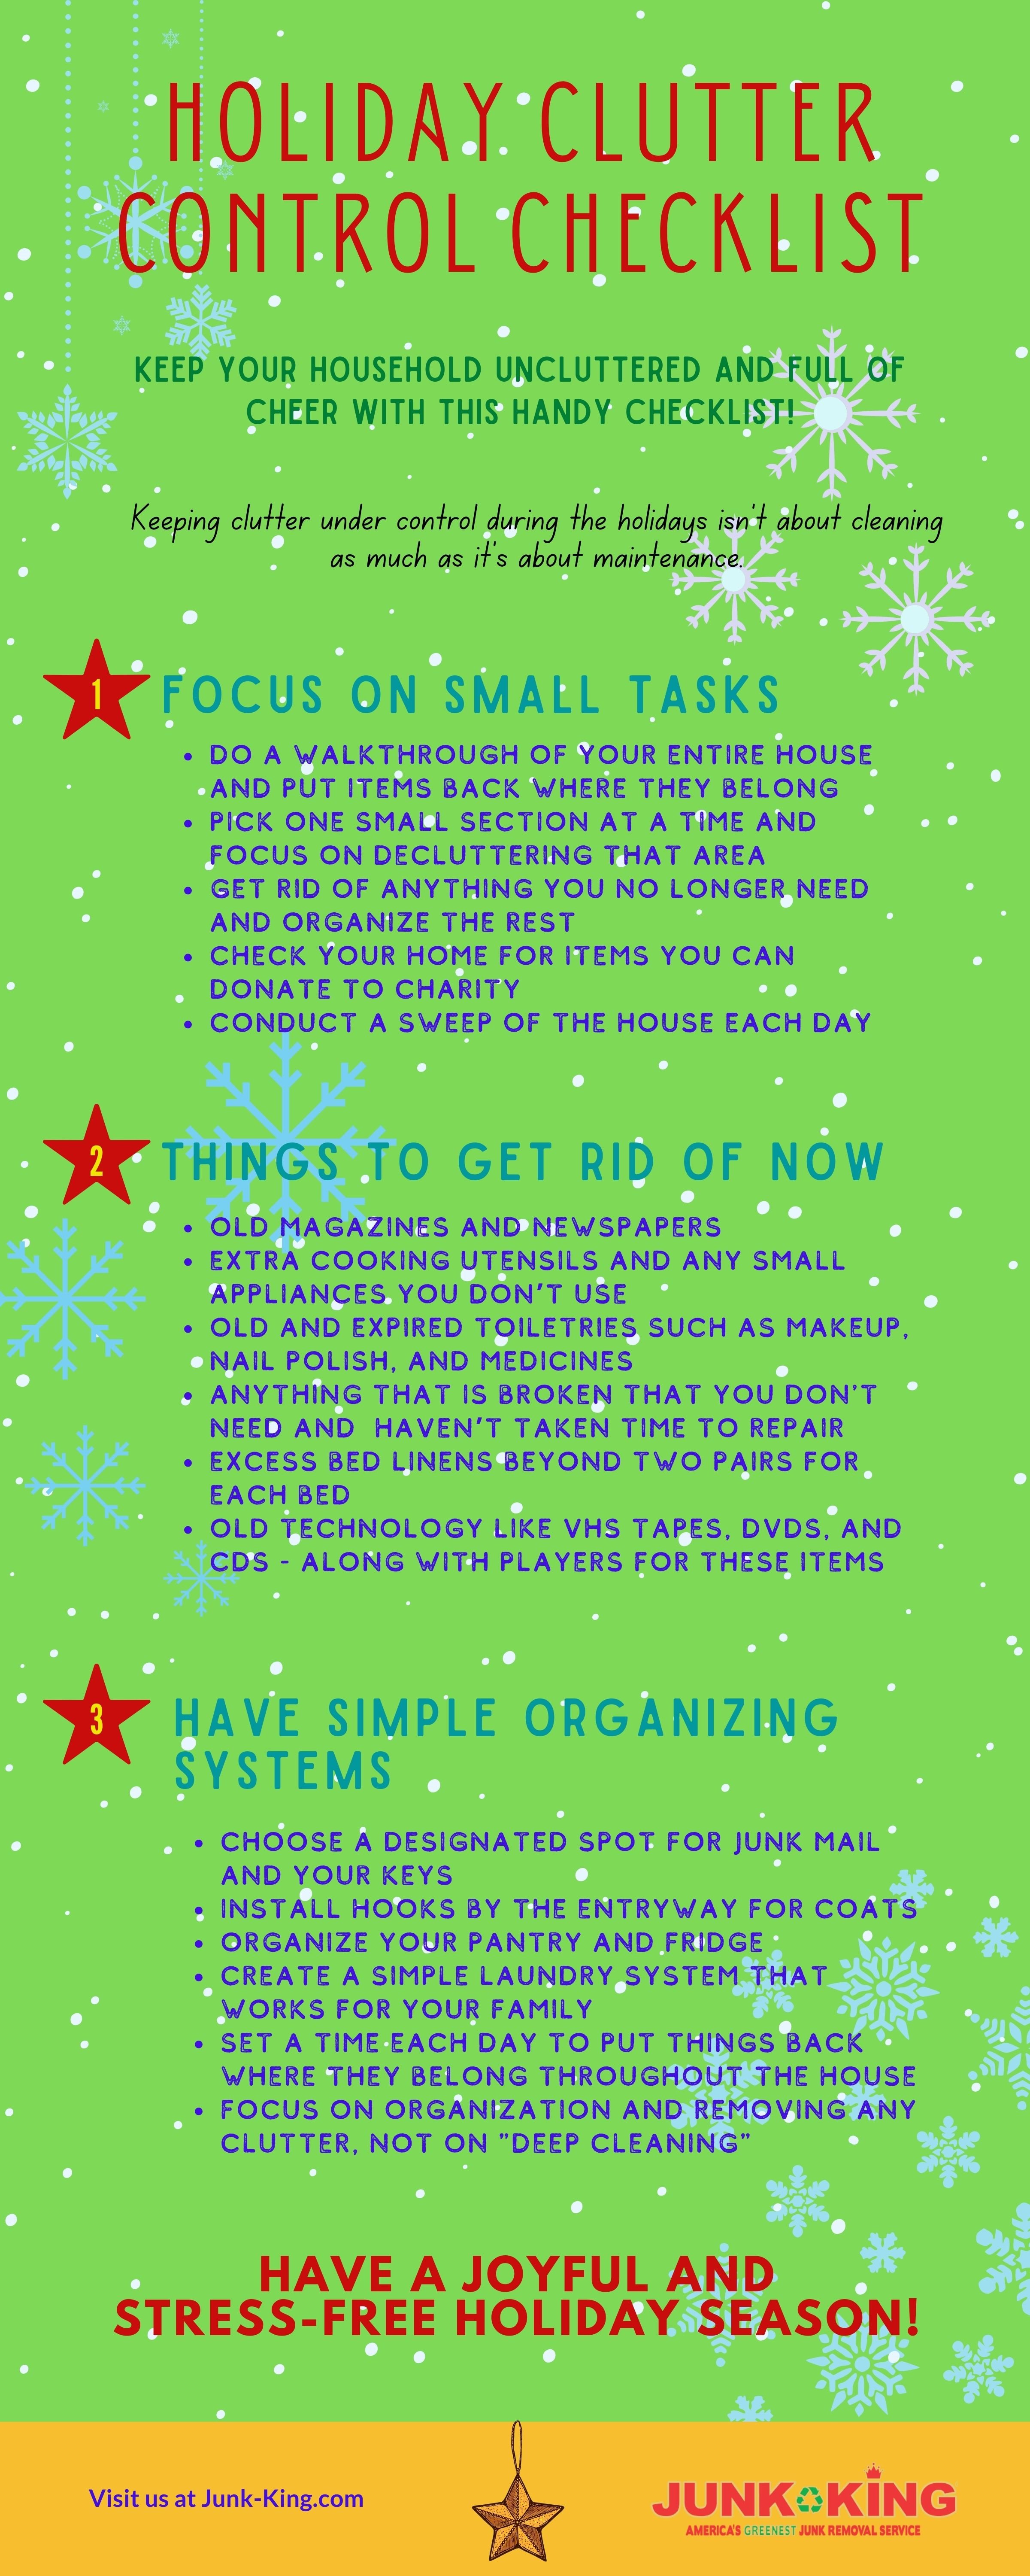 holiday clutter control checklist